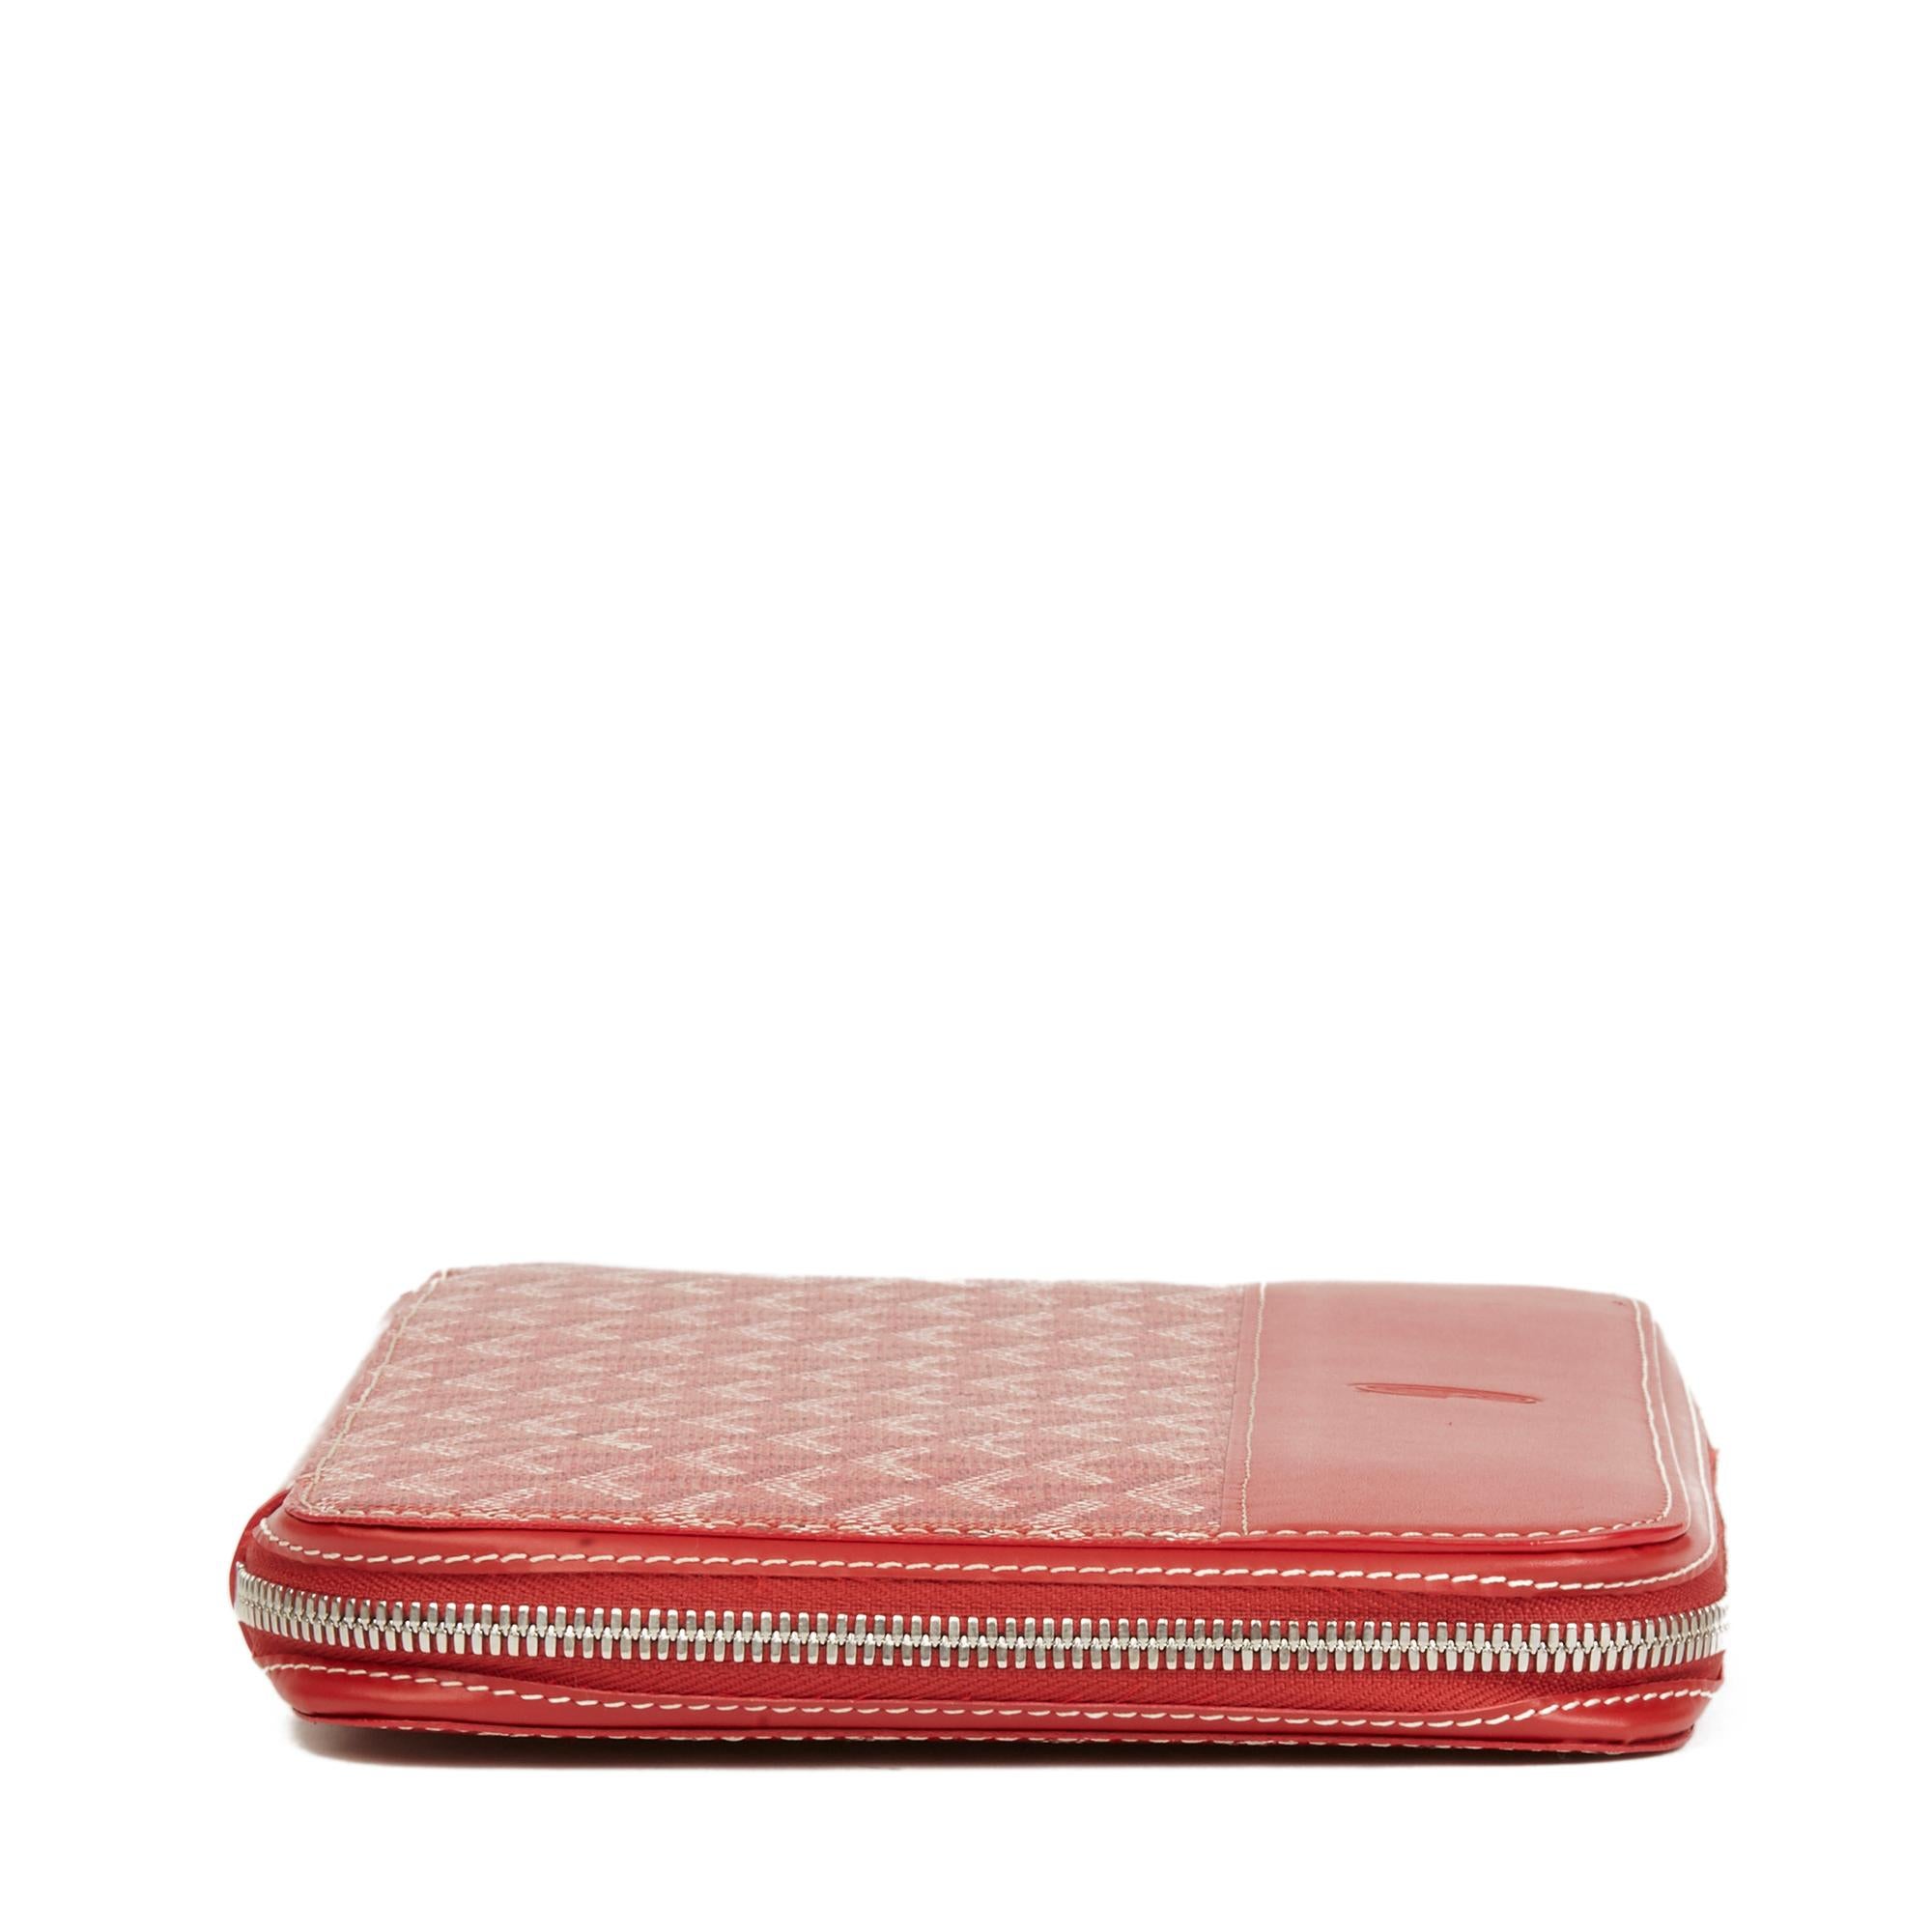 GOYARD
Red Chevron Coated Canvas Opera Wallet

Reference: HB2561
Serial Number: CHN 120121
Age (Circa): 2010
Accompanied By: Goyard Dust Bag
Authenticity Details: Serial Stamp (Made in France)
Gender: Unisex
Type: Accessory, Clutch

Colour: